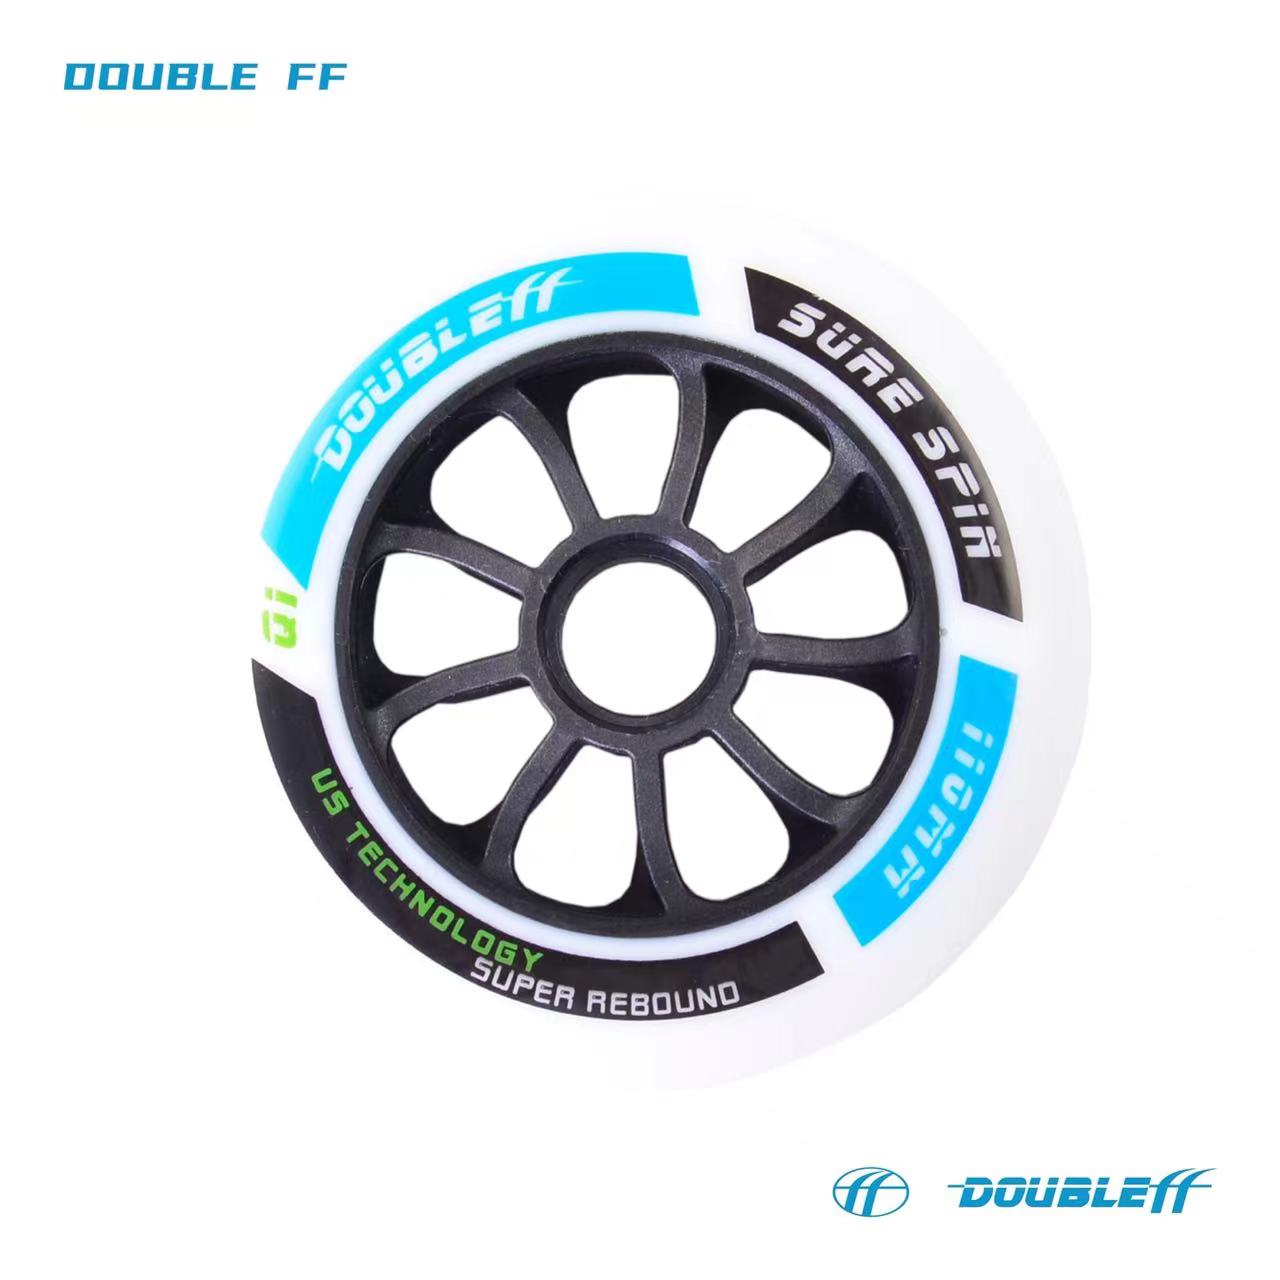 Double FF Professional Speed Skate Wheel 85A High Resilience Speed Skate Wheels for training or compitetion